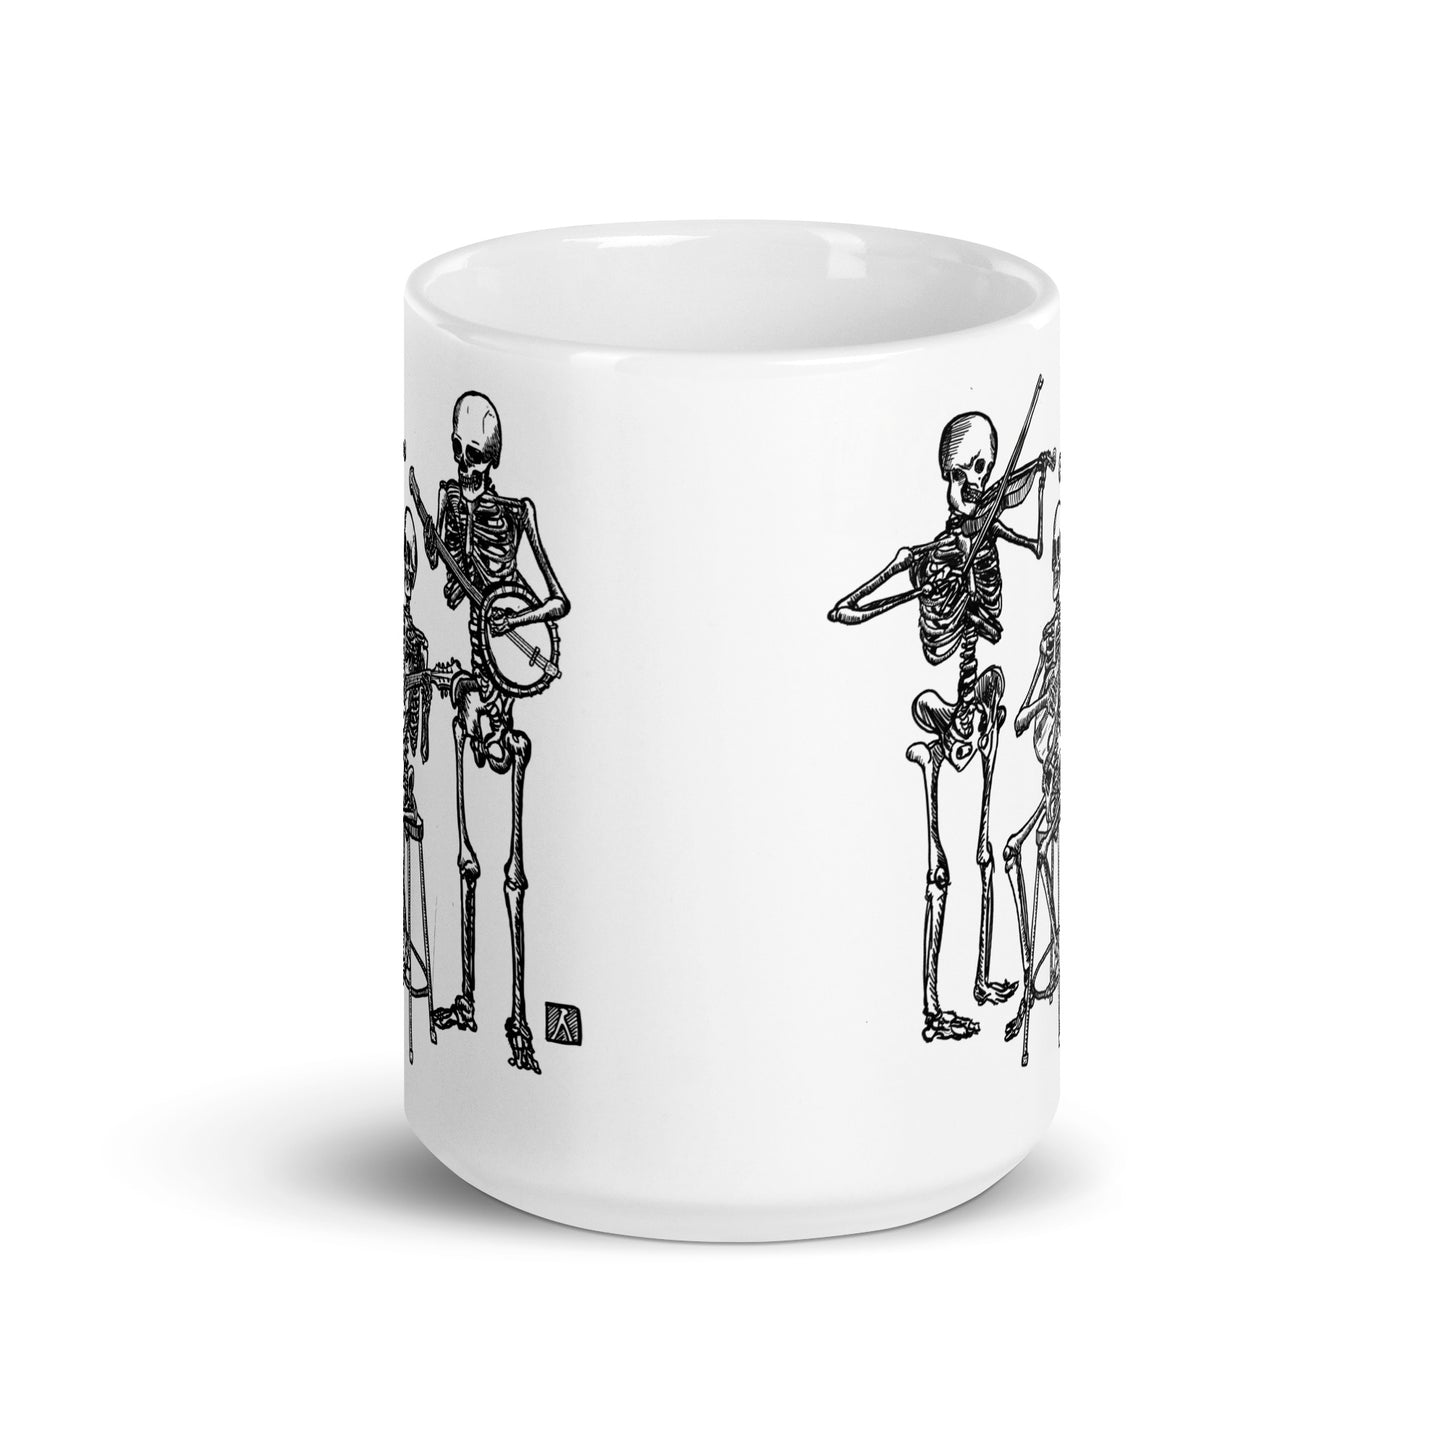 BellavanceInk: Coffee Mug With Skeletons Playing In An Old TIme Band